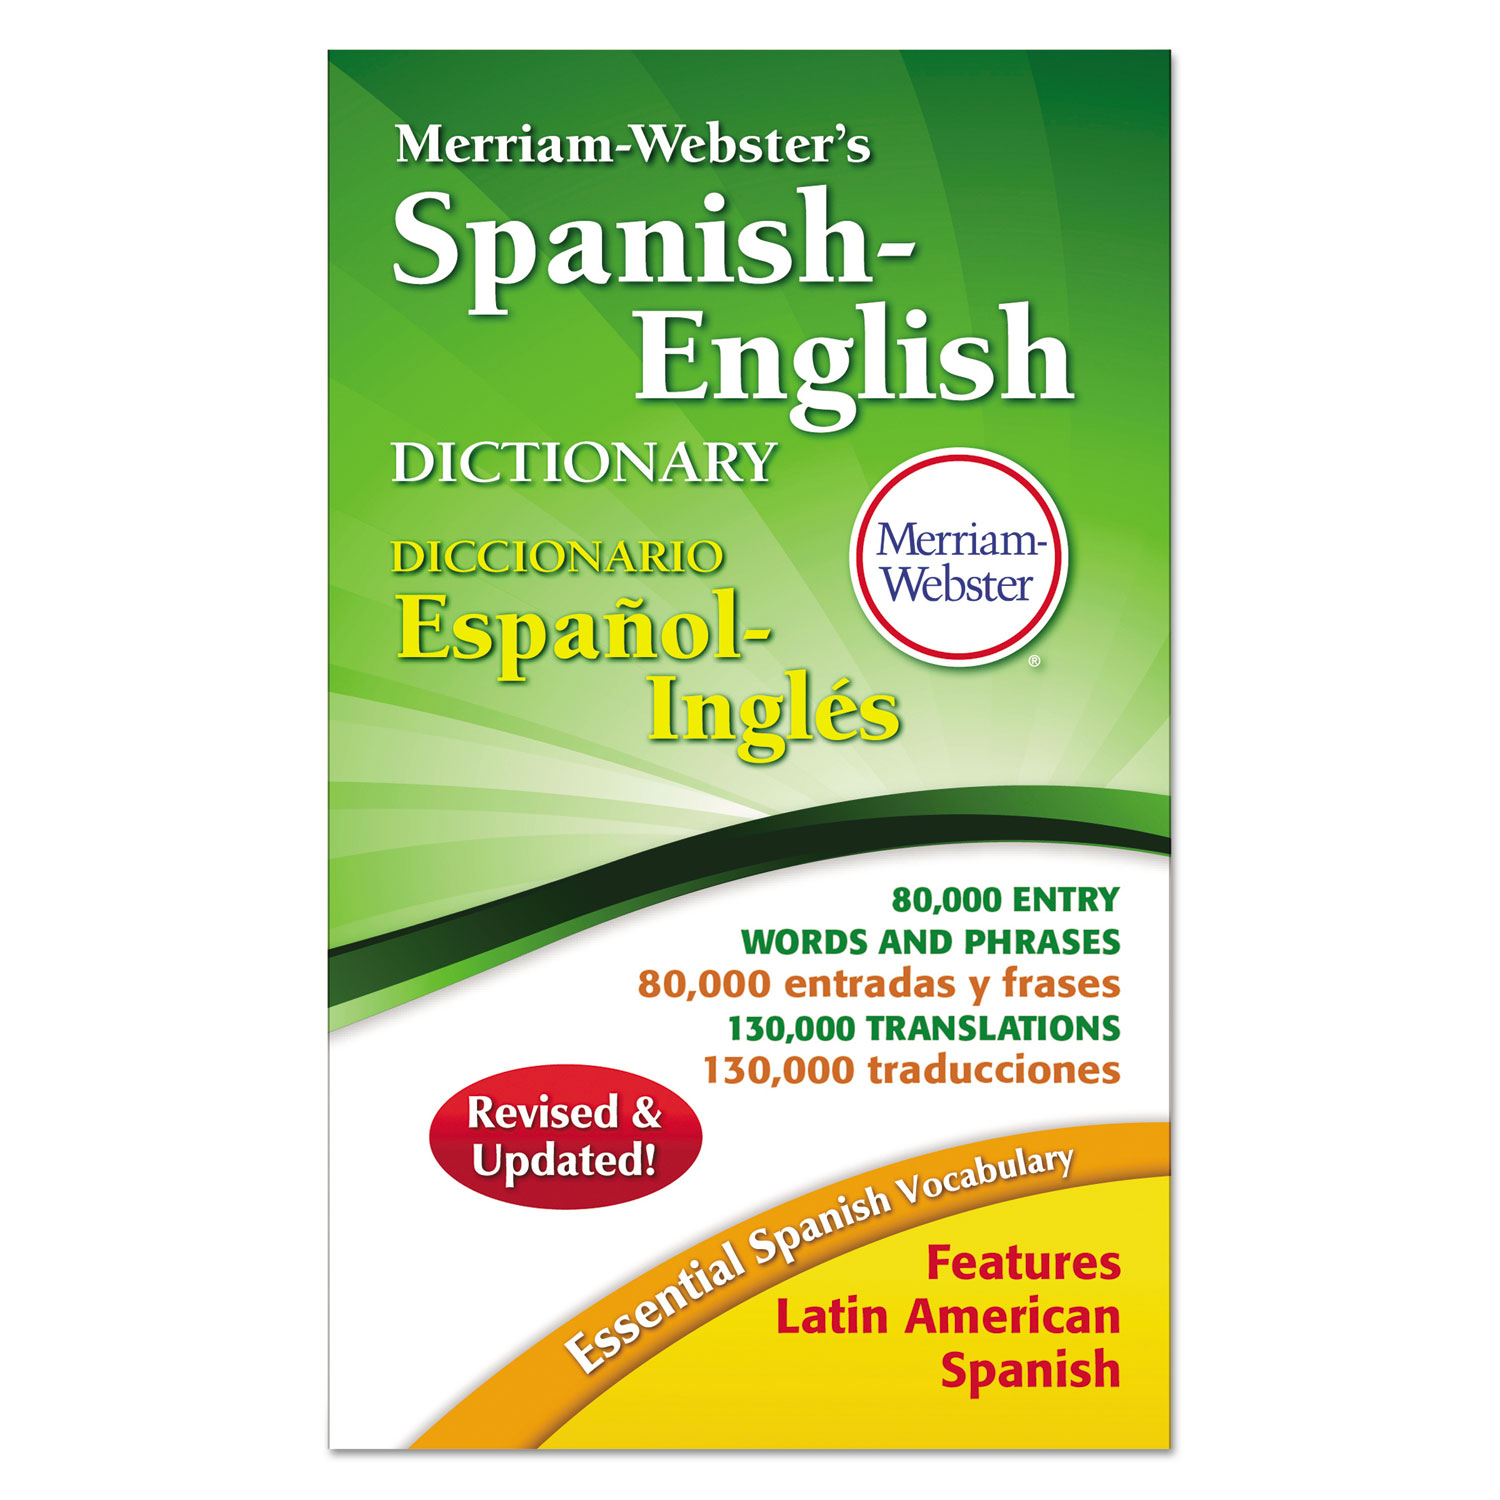  Merriam Webster MER824 Merriam-Webster’s Spanish-English Dictionary, 928 Pages (MER824) 